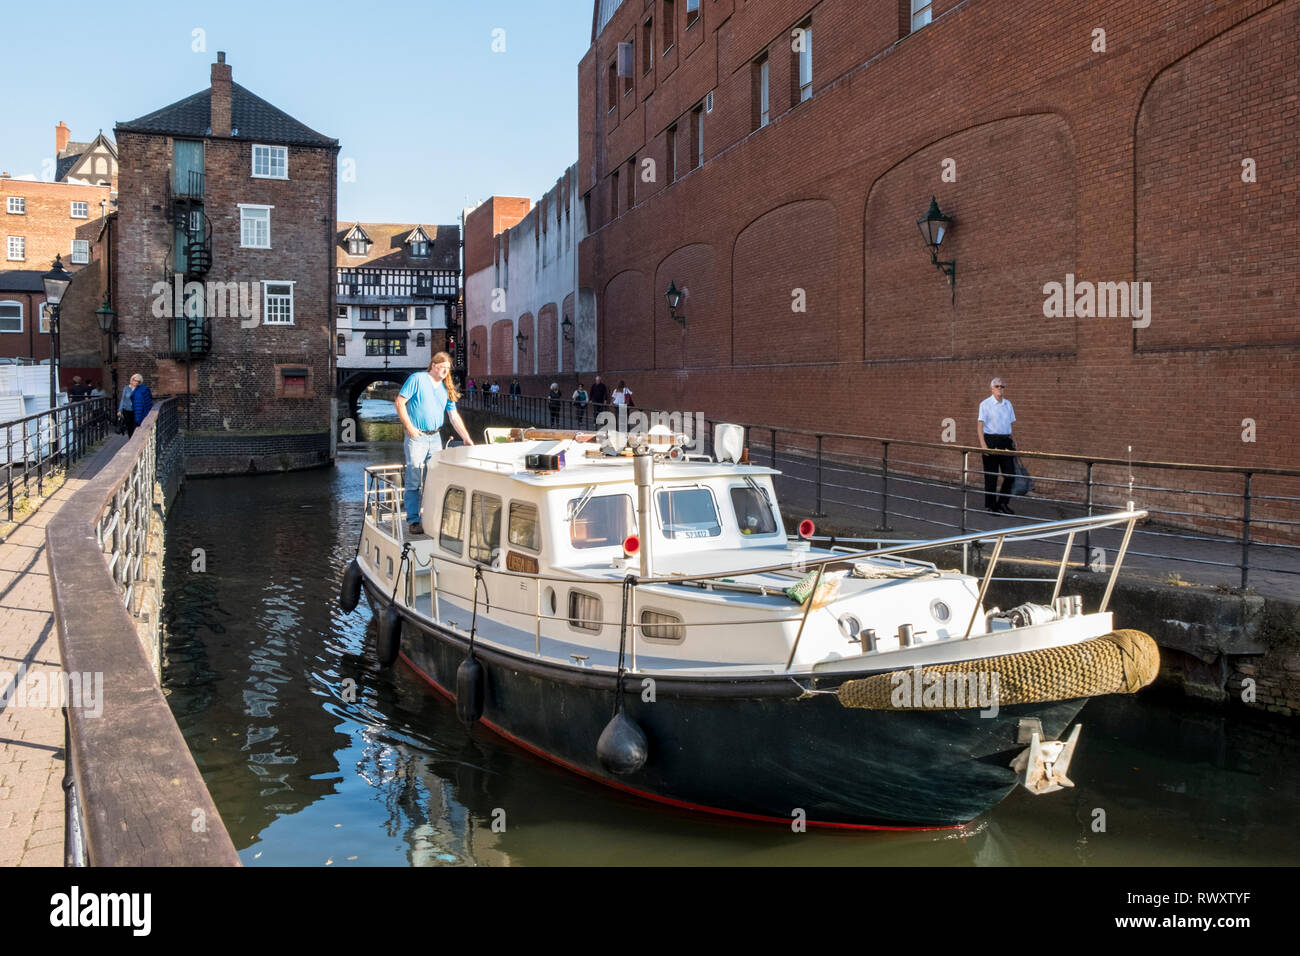 A boat sailing on the River Witham with the Glory Hole and High Bridge in the distance, Lincoln, England, UK Stock Photo